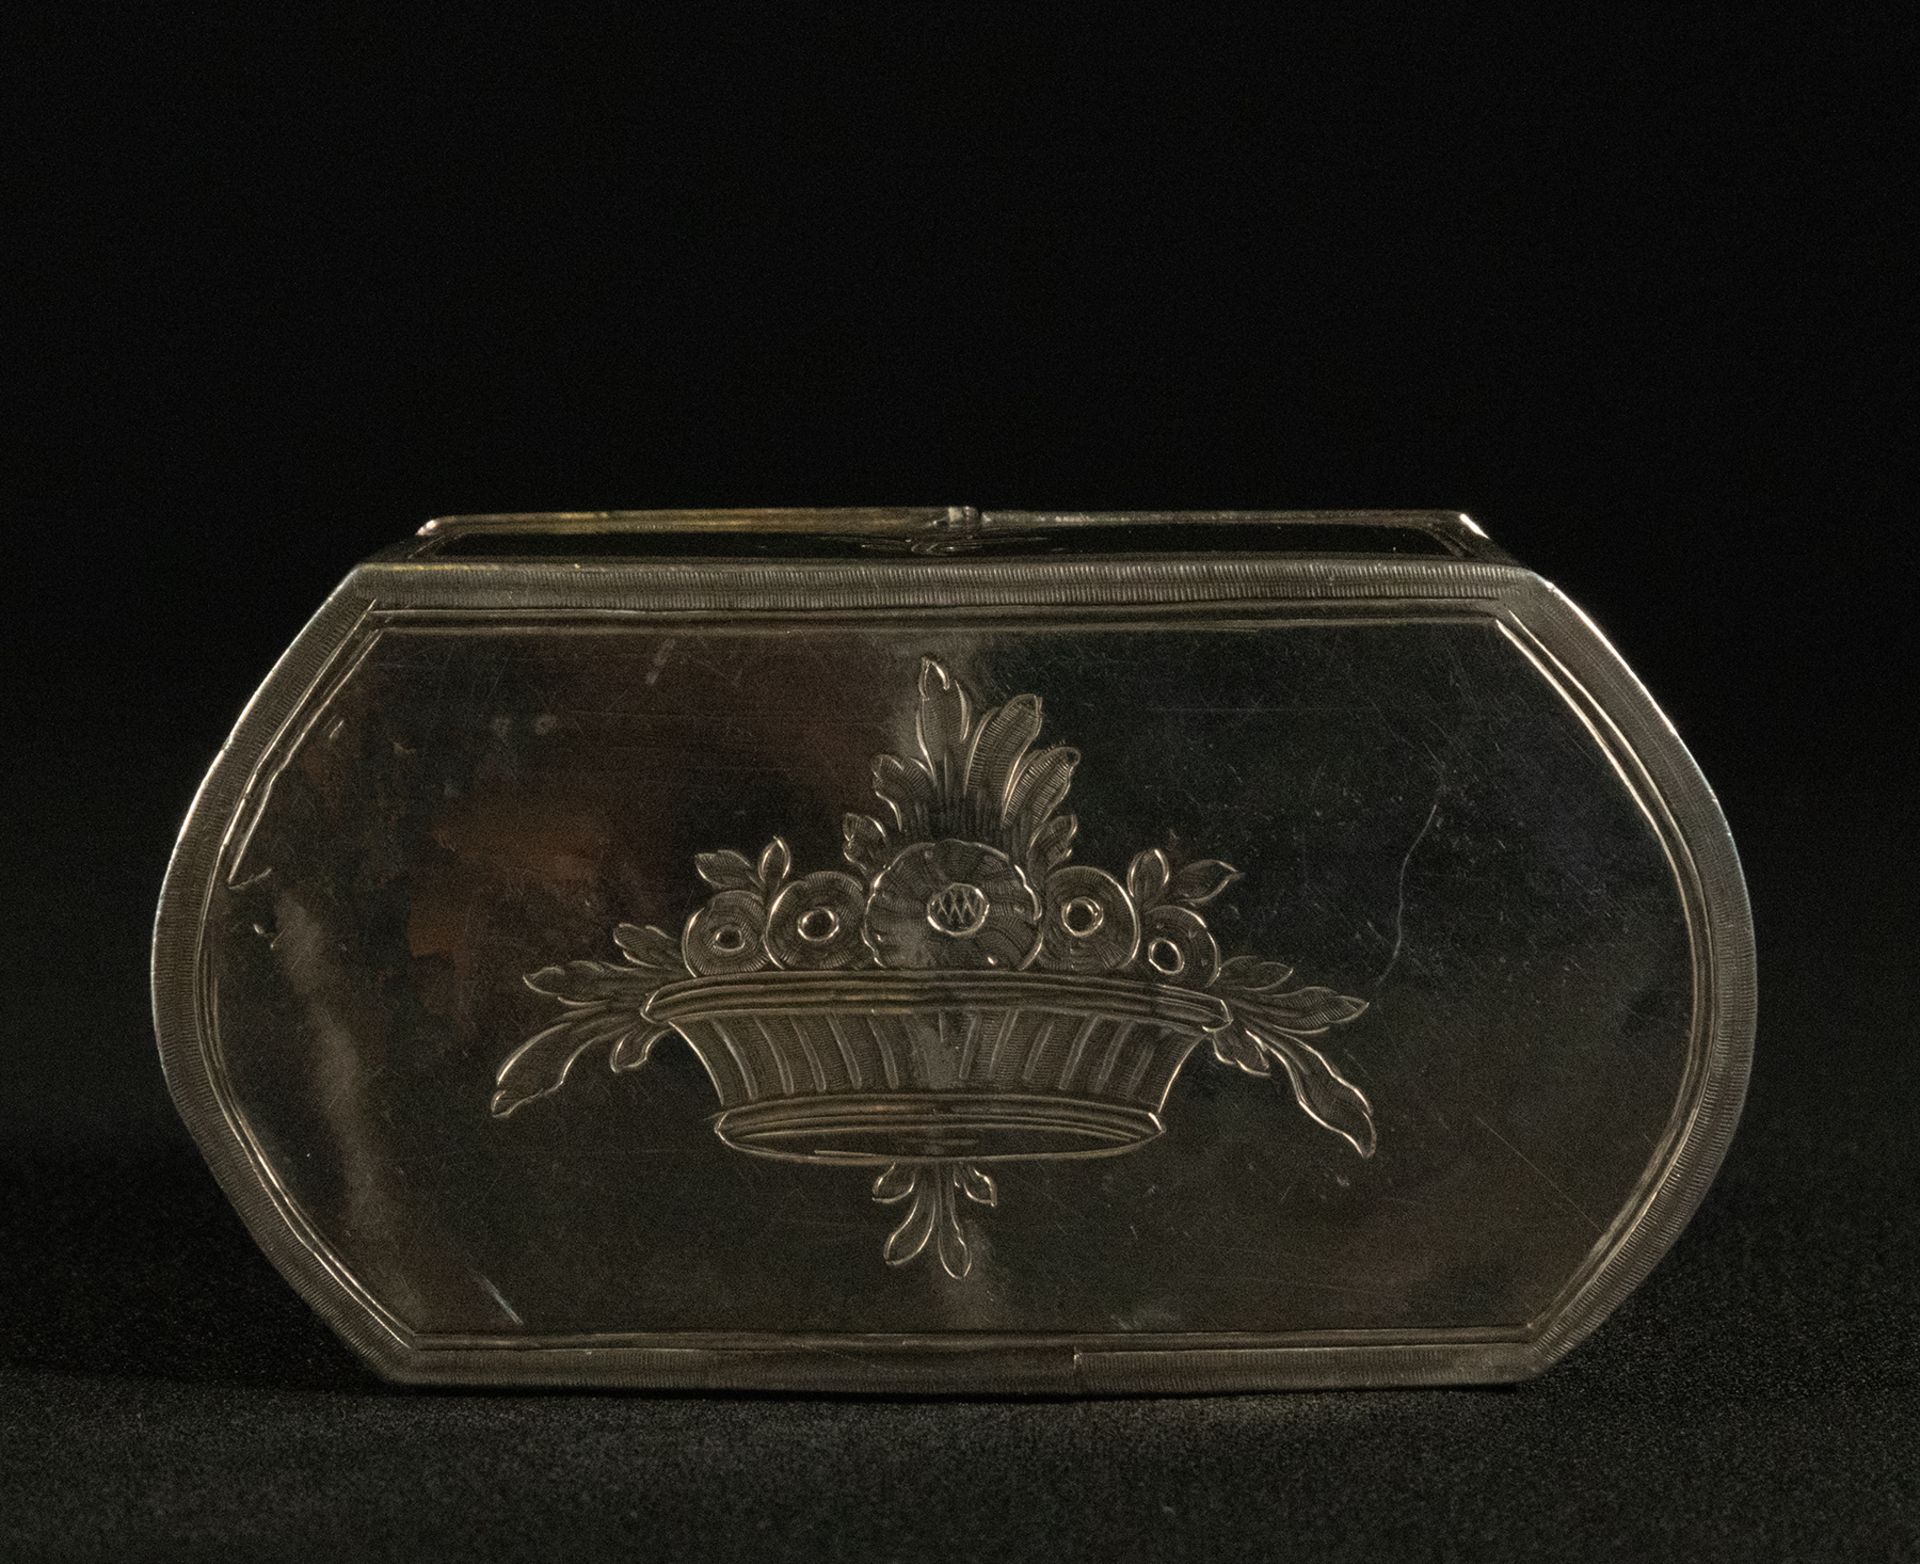 Silver container for the Holy Oils, end of the 18th century - Image 4 of 5